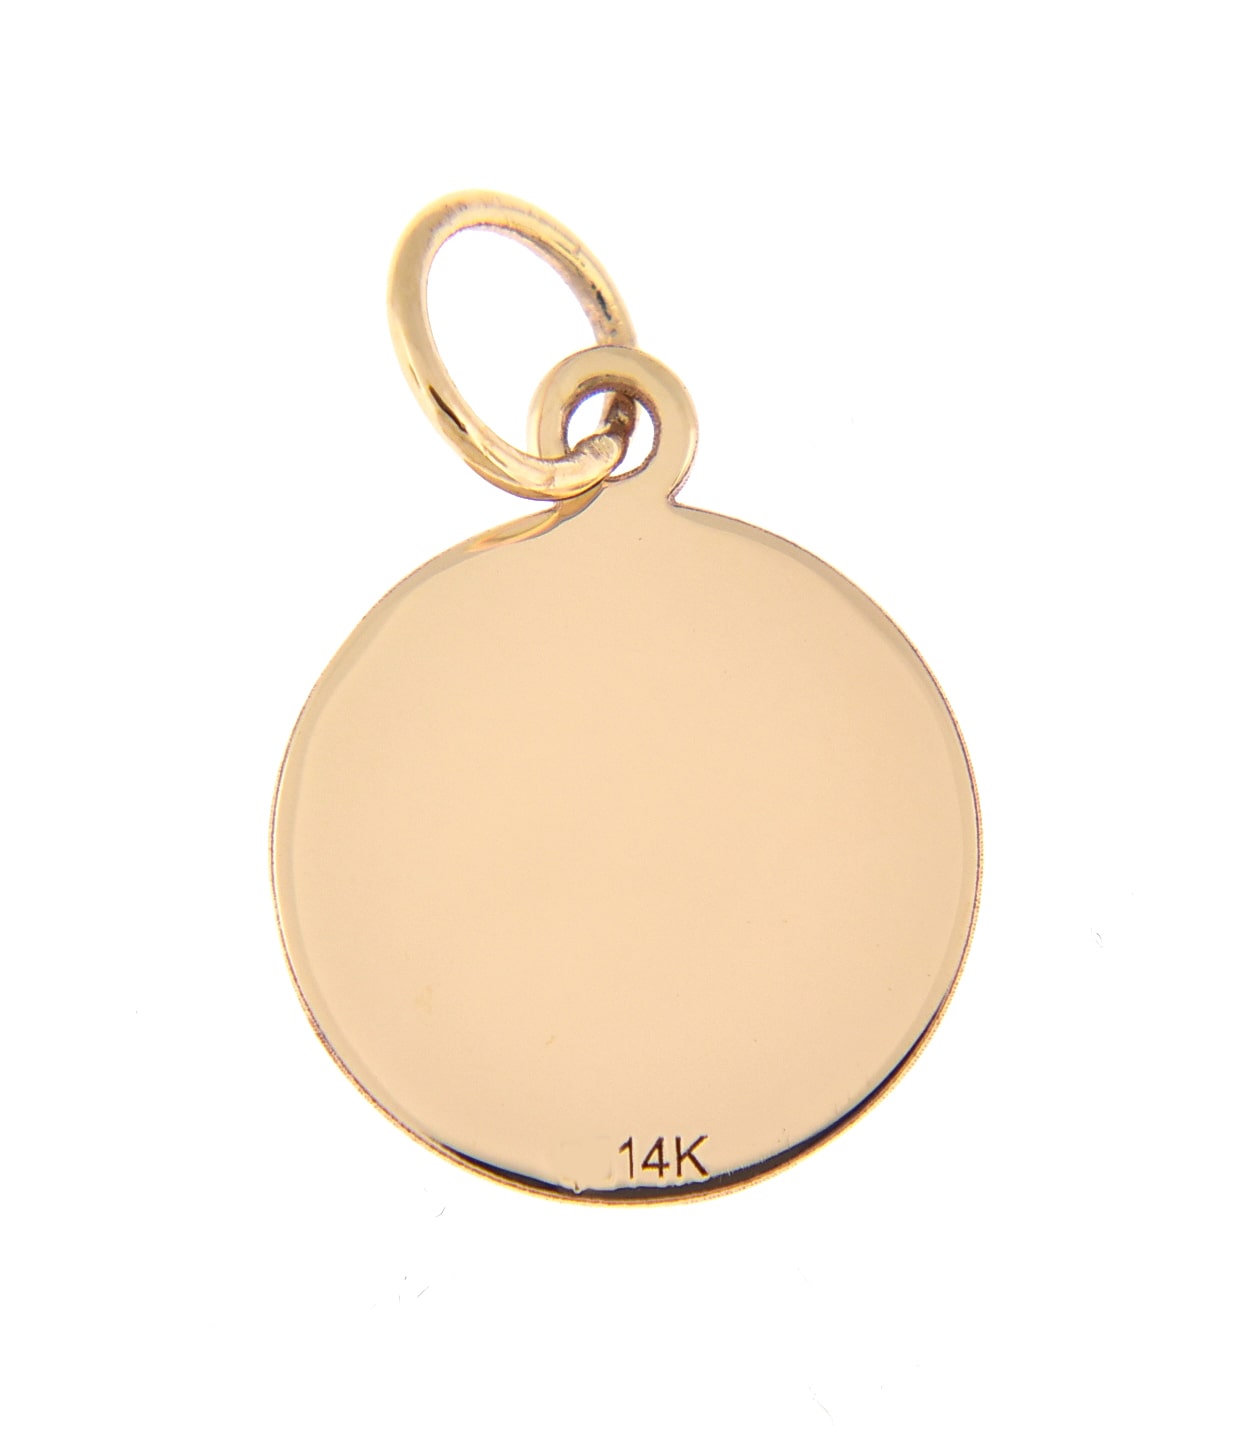 14K Solid Yellow Gold 13mm Round Disc Pendant Charm Letter Initial Personalized Gift